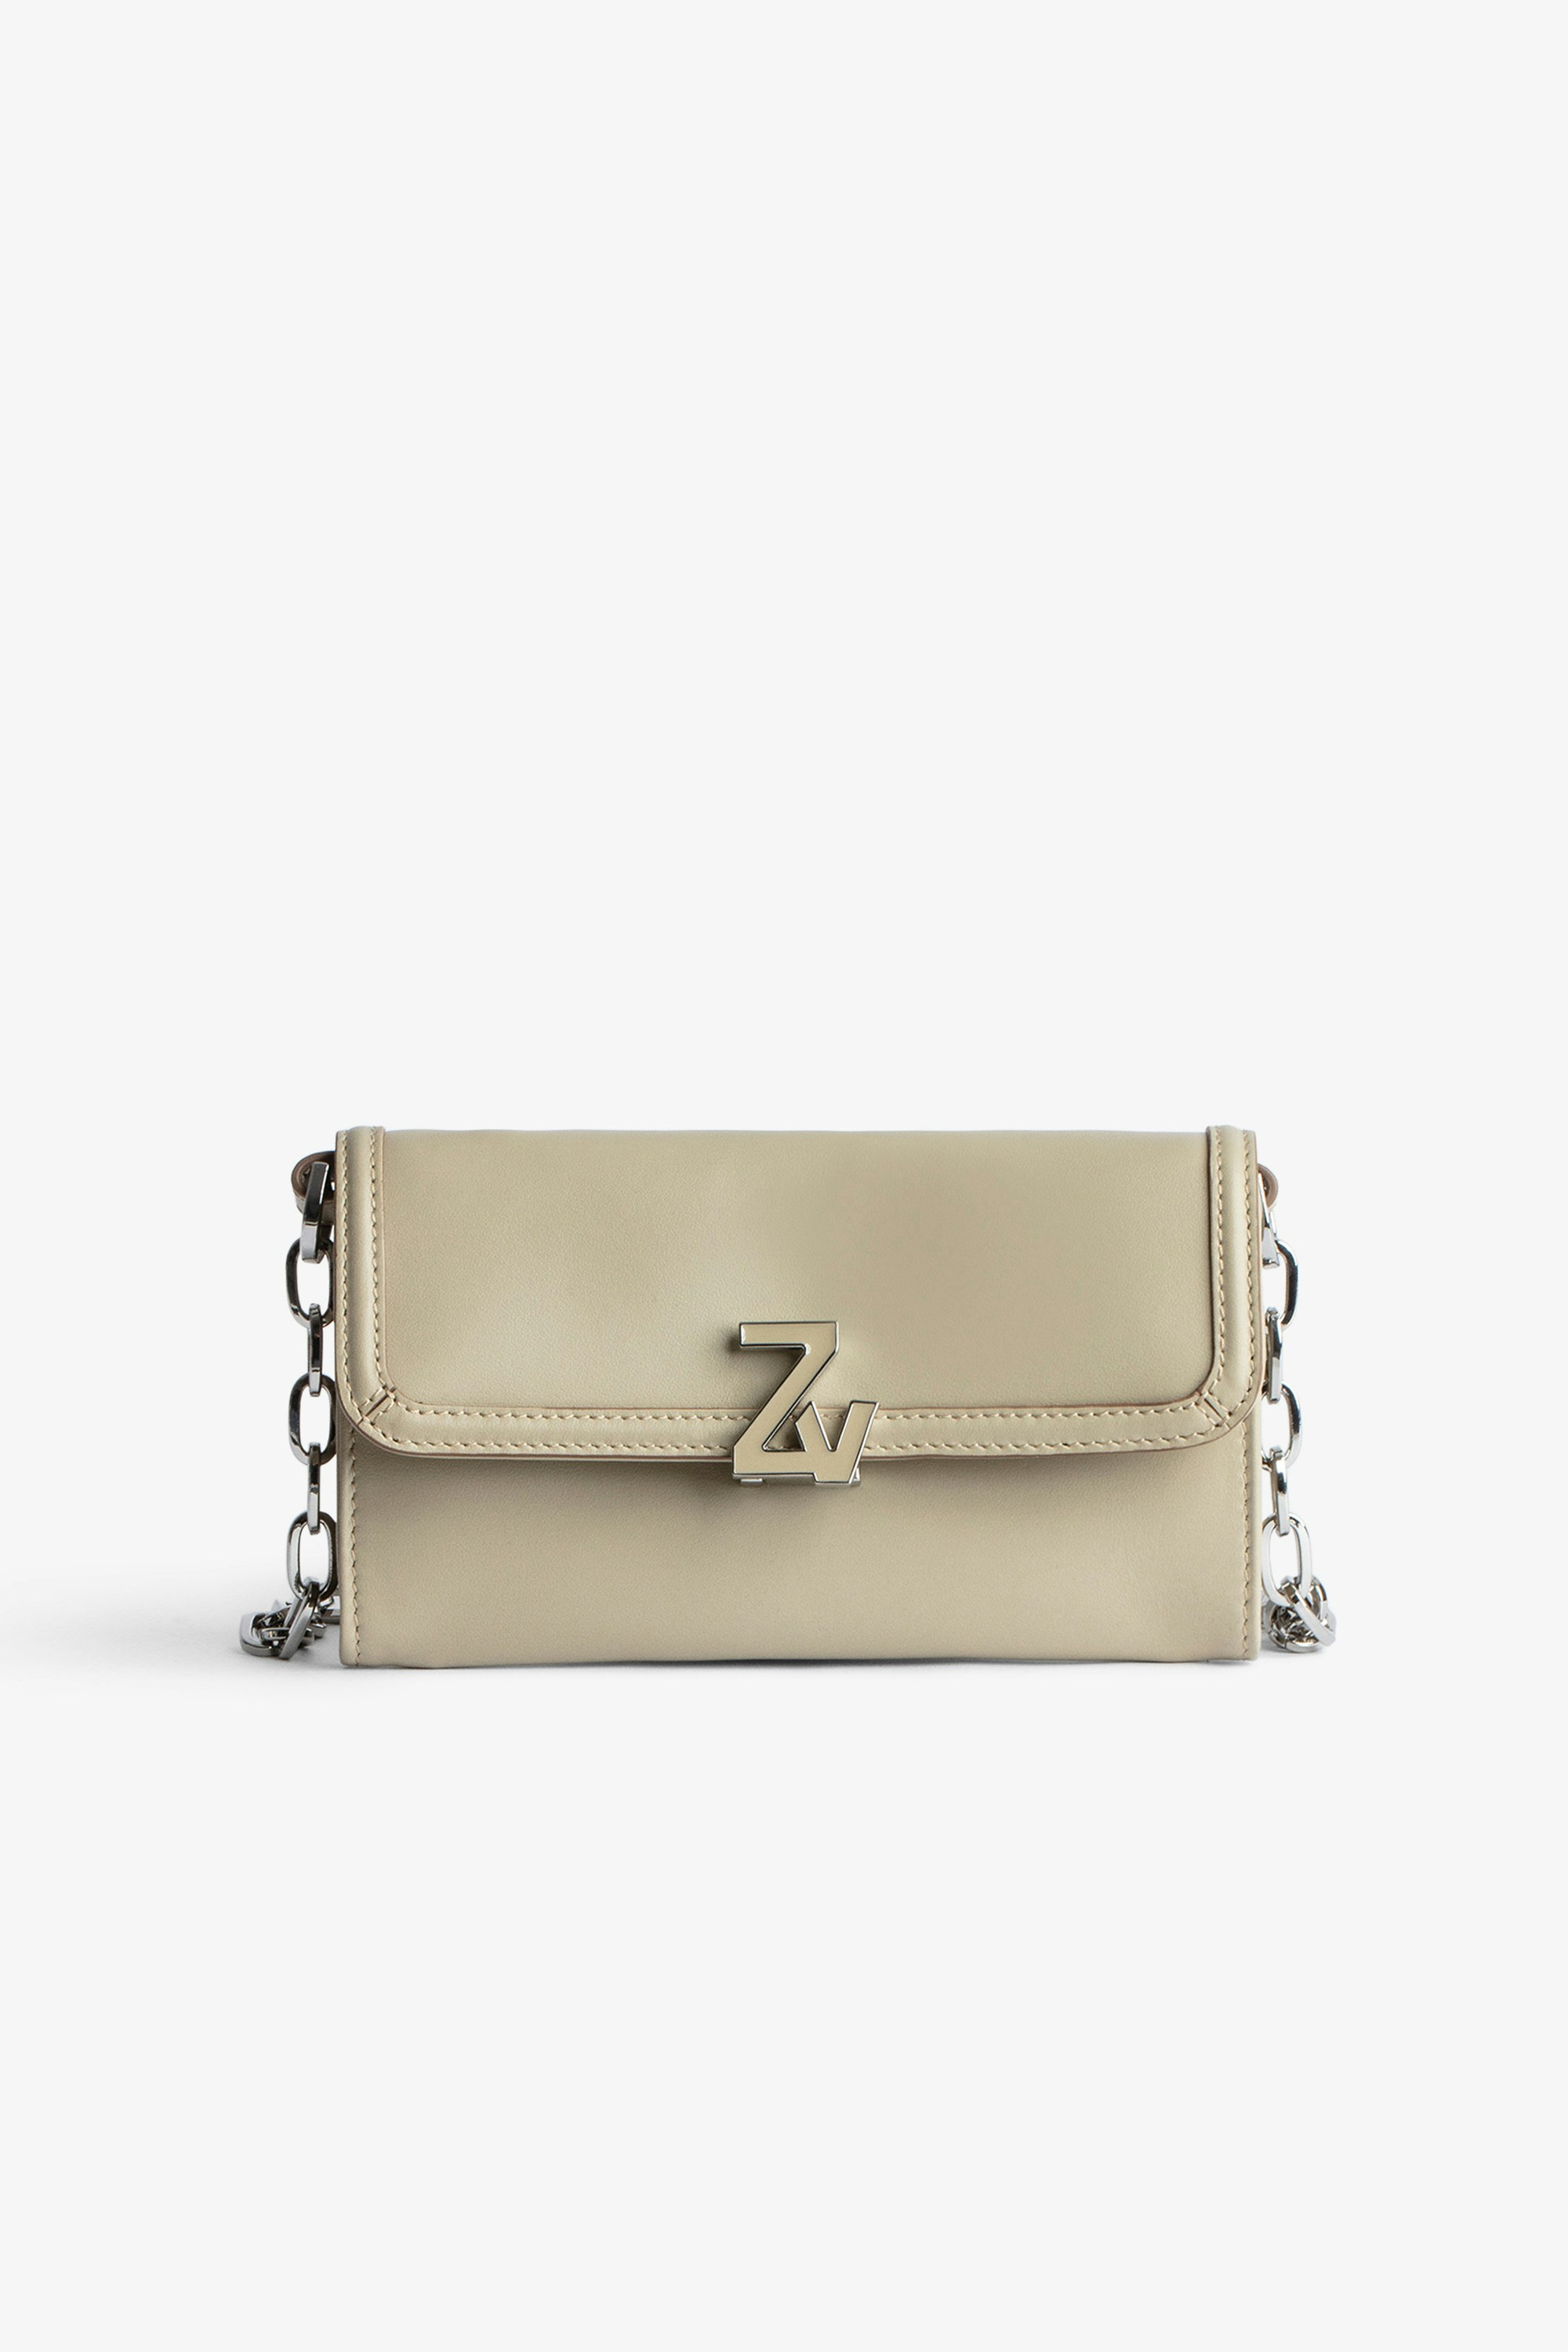 ZV Initiale Le Long 財布 Women’s beige smooth leather wallet with yellow ZV